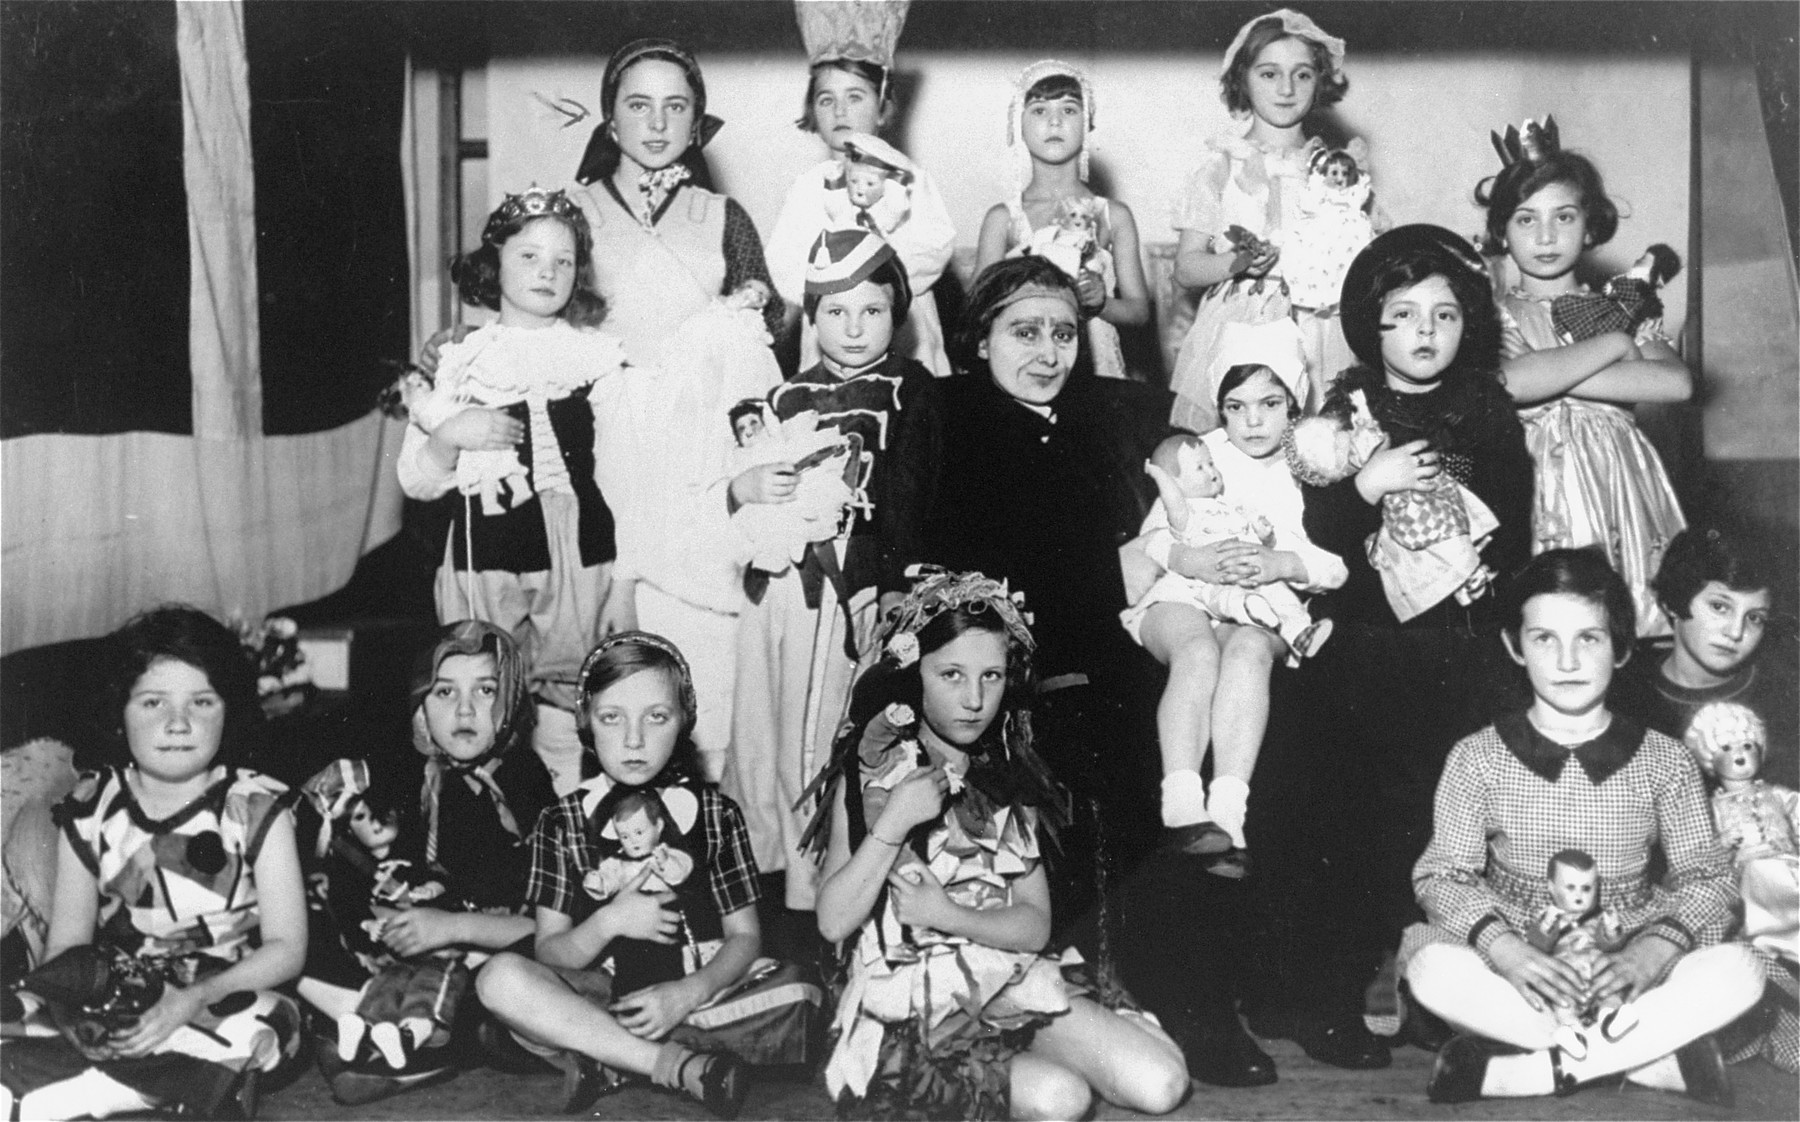 Group portrait of children at a costume party at the Carolinenskolen Jewish Girls' School in Copenhagen.  

The children are dressed as characters from Hans Christian Andersen's fairy tales.  The school was named after the Danish princess Caroline.